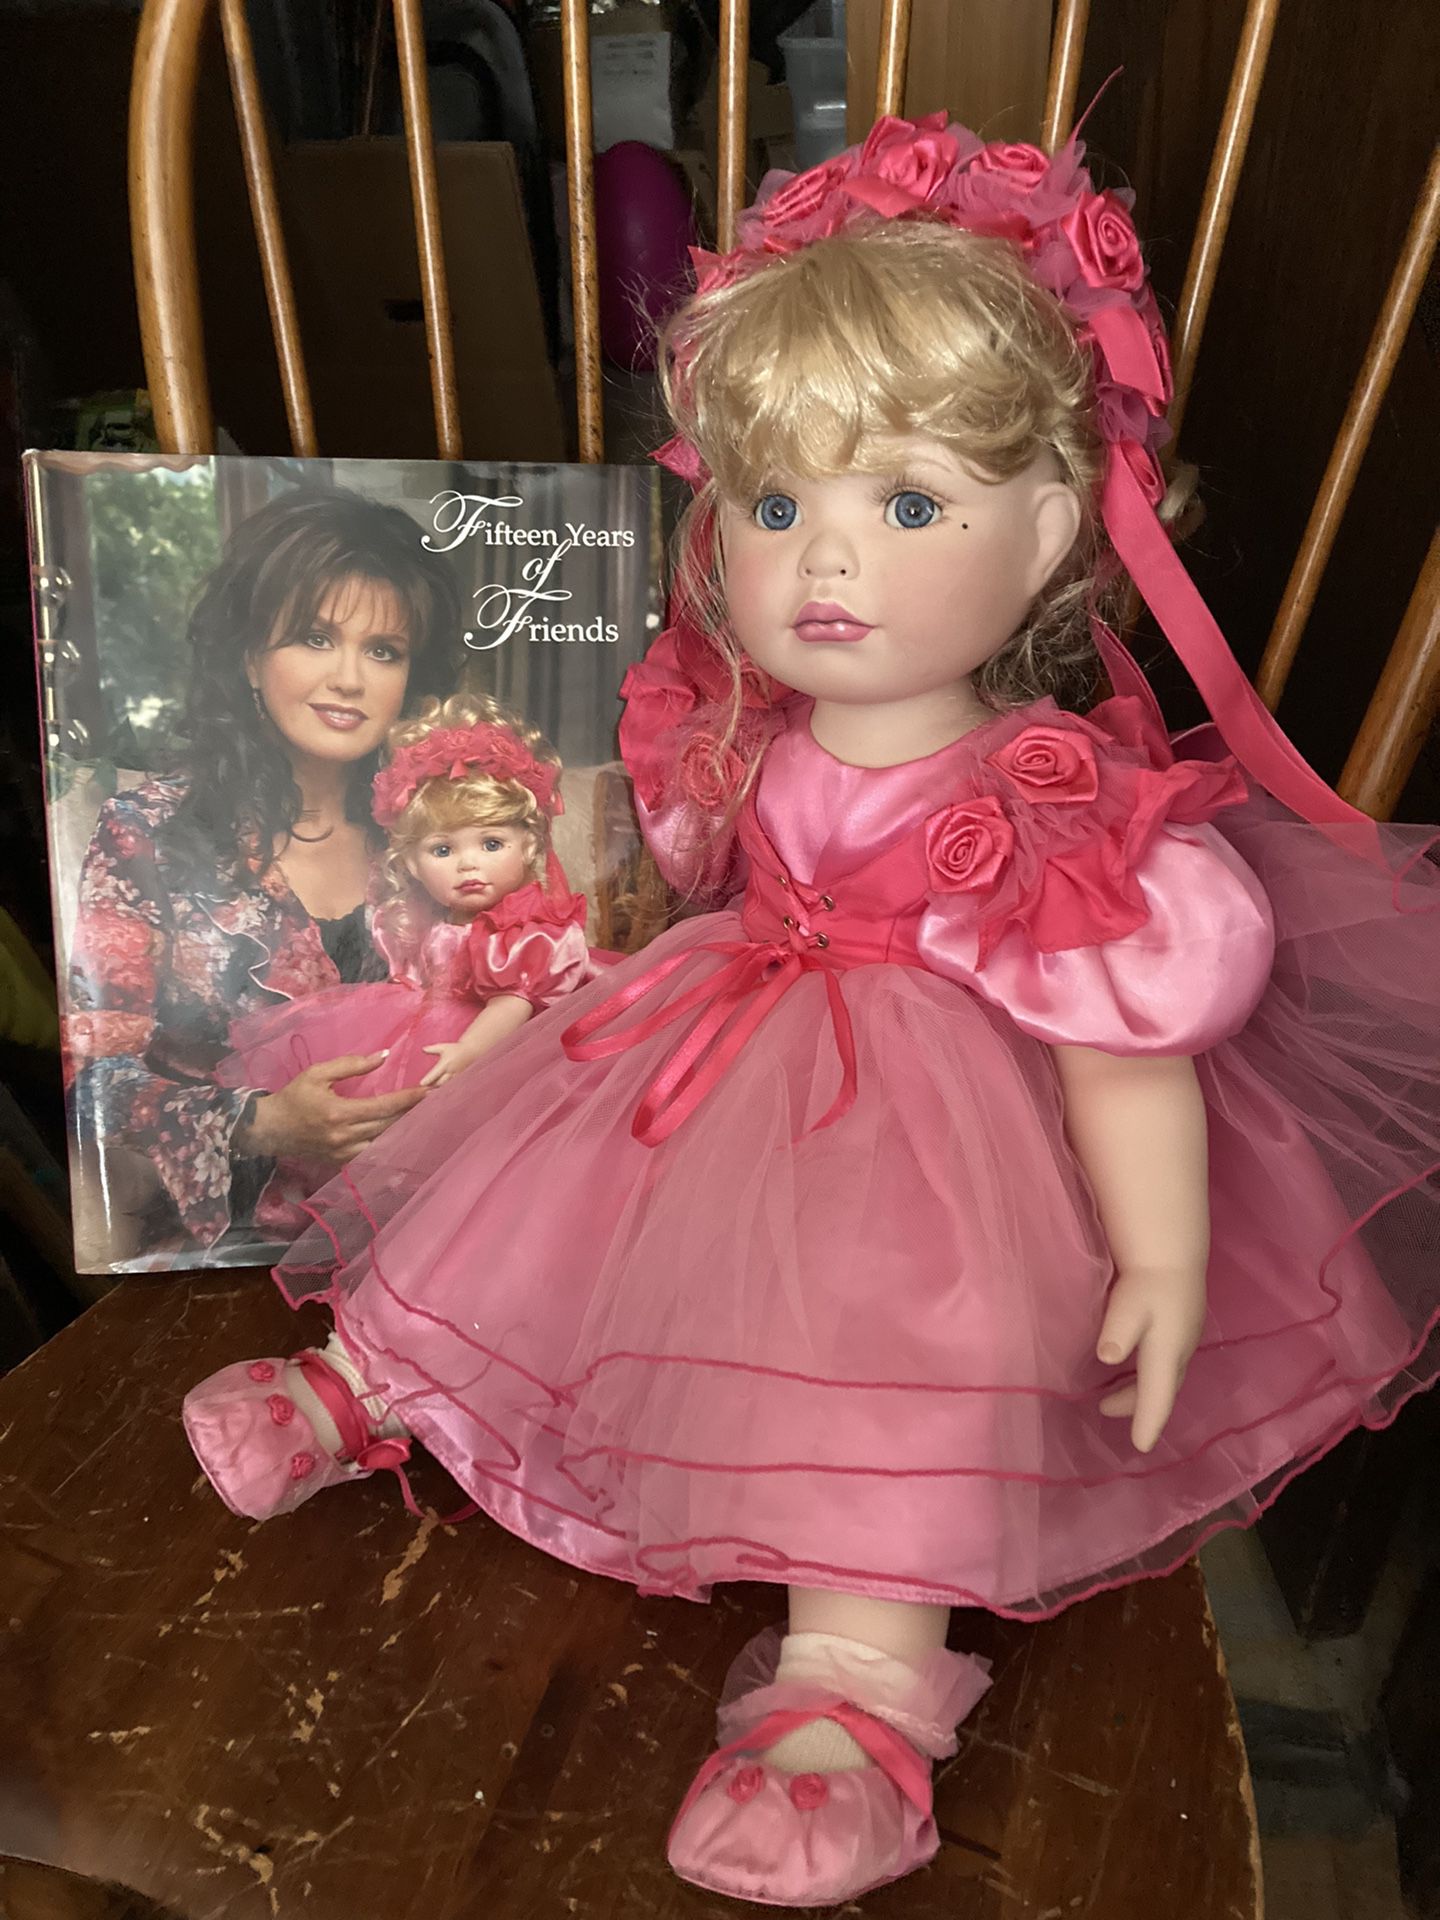 Coming Up Roses - Marie Osmond Doll